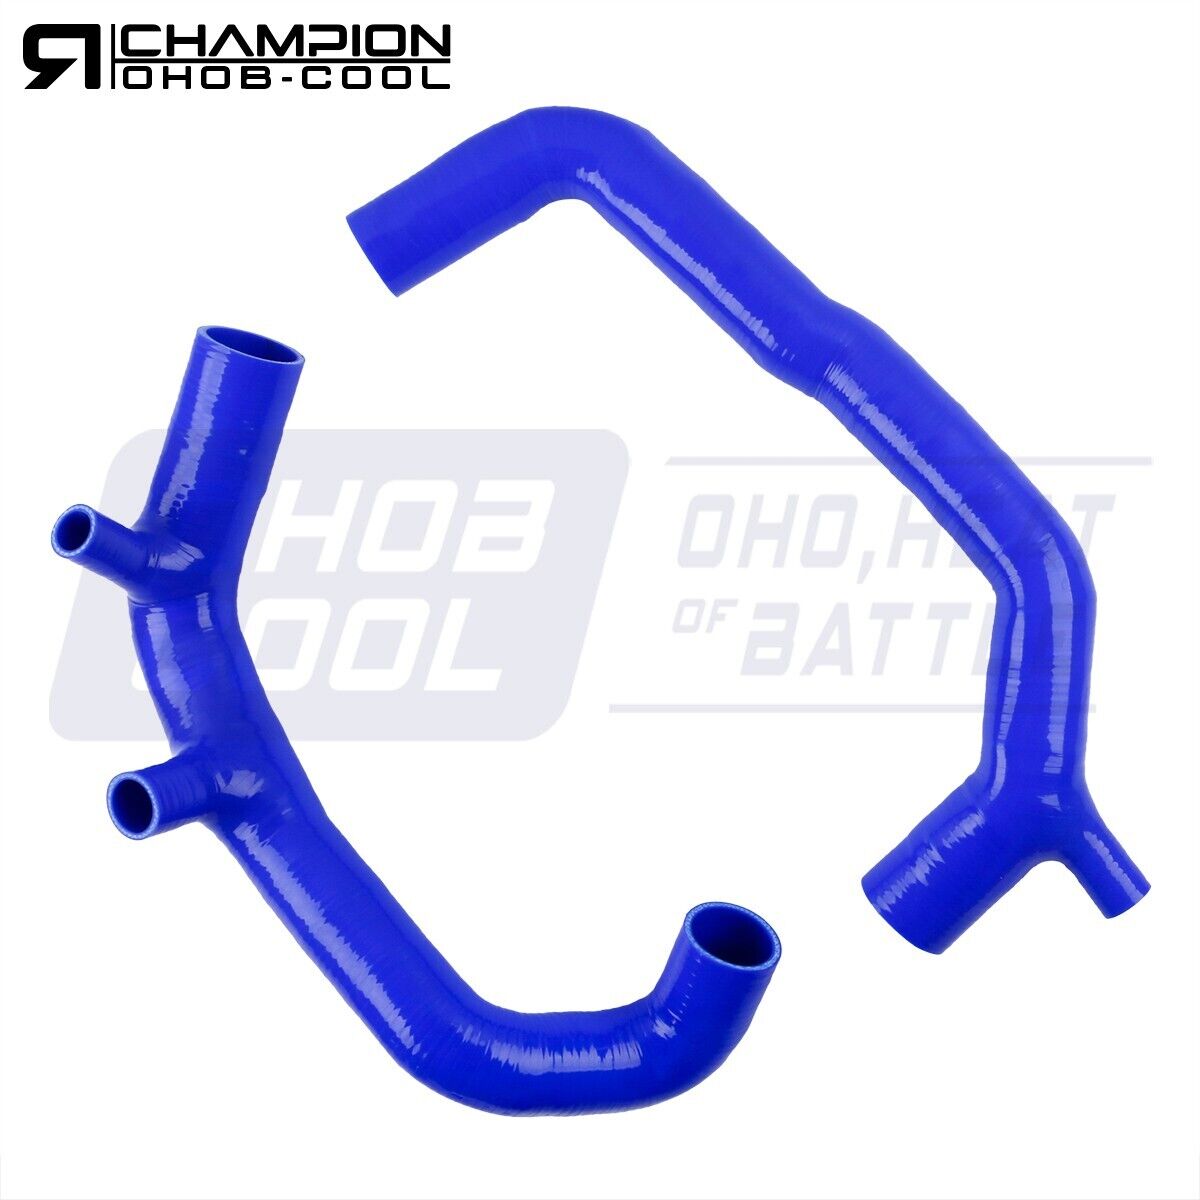 For BMW N54 135i 335i 335Xi/is 535i Z4 3.0 Turbo Silicone Inlet Intake Hose Pipe